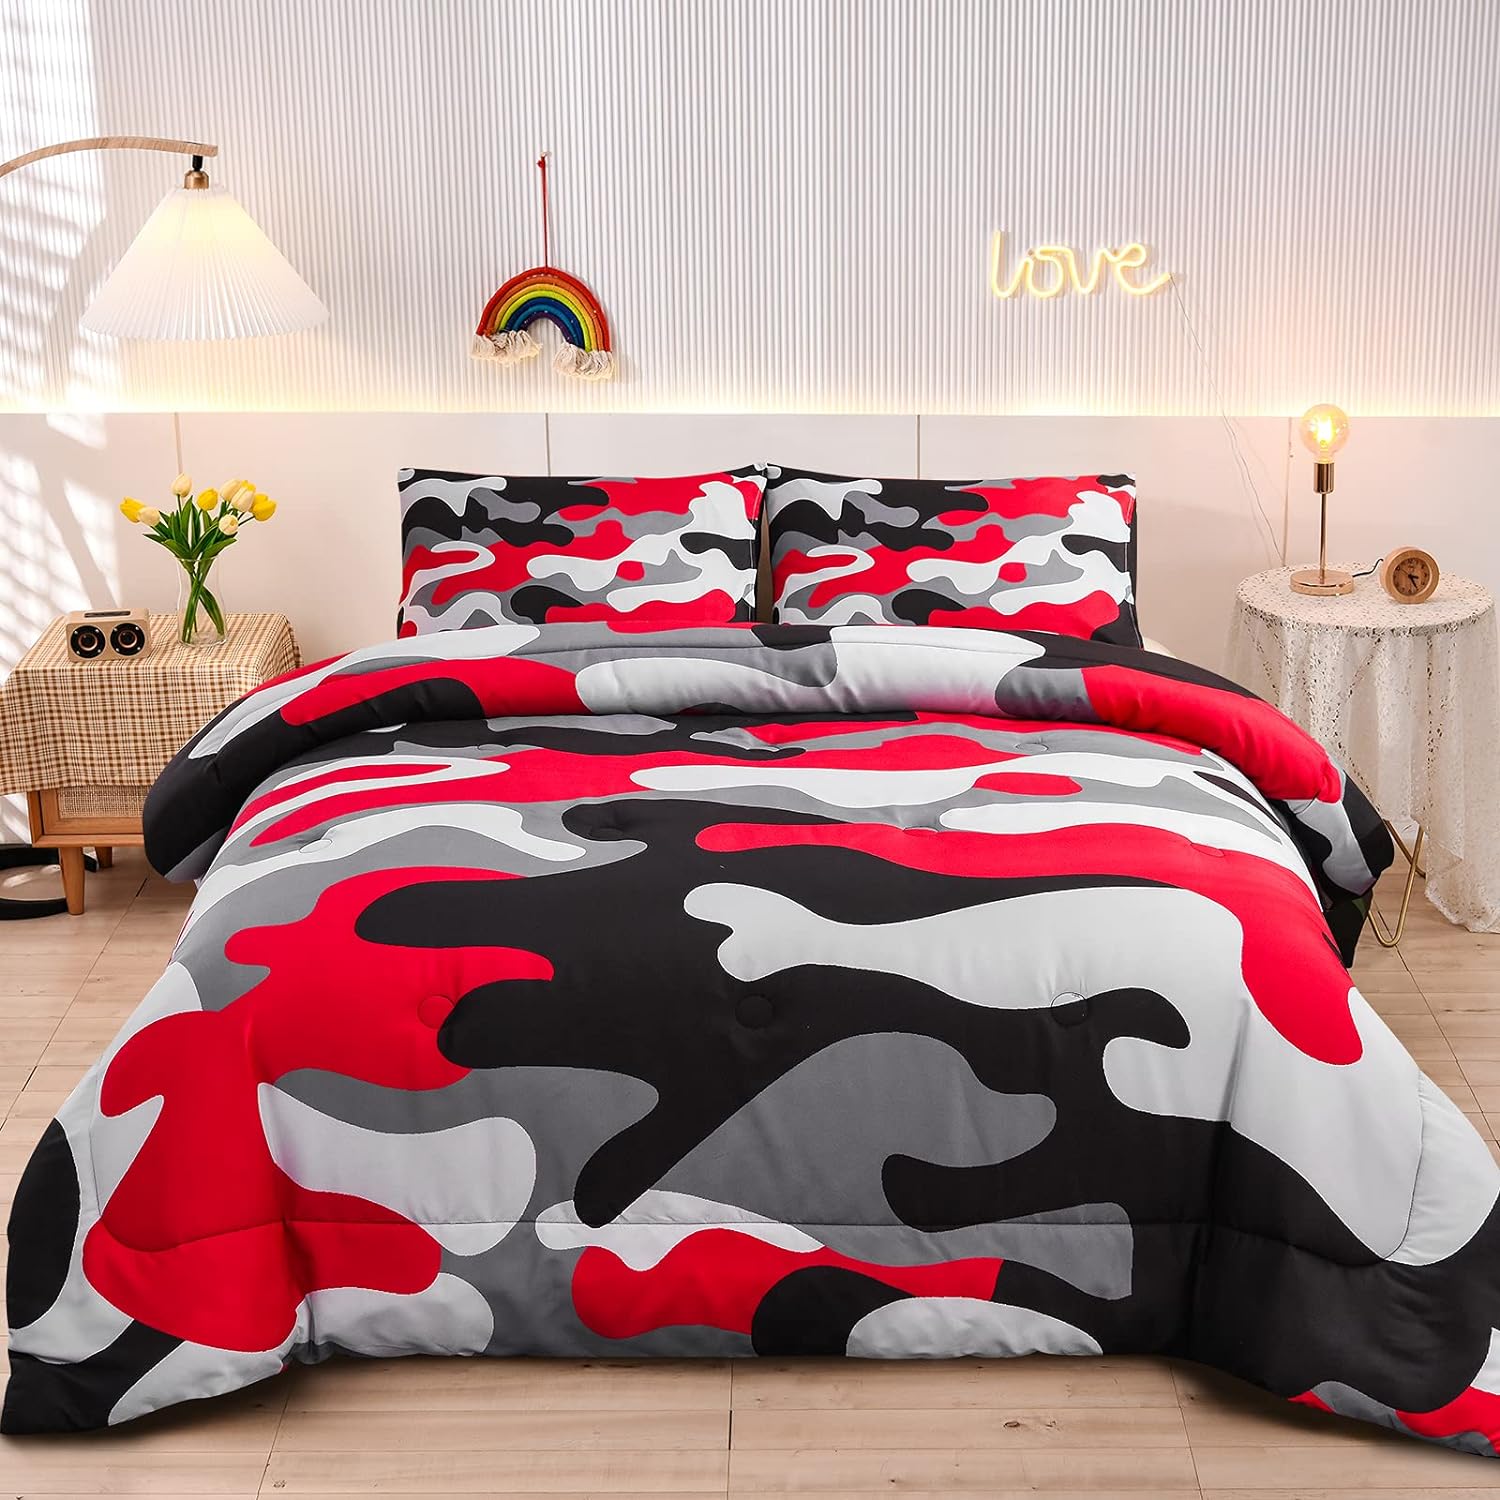 TKM Home Camouflage Bedding Set, Colorful Pattern Style Queen Comforter Set, 3 Pcs One Comforter And Two Pillowcases In One B…